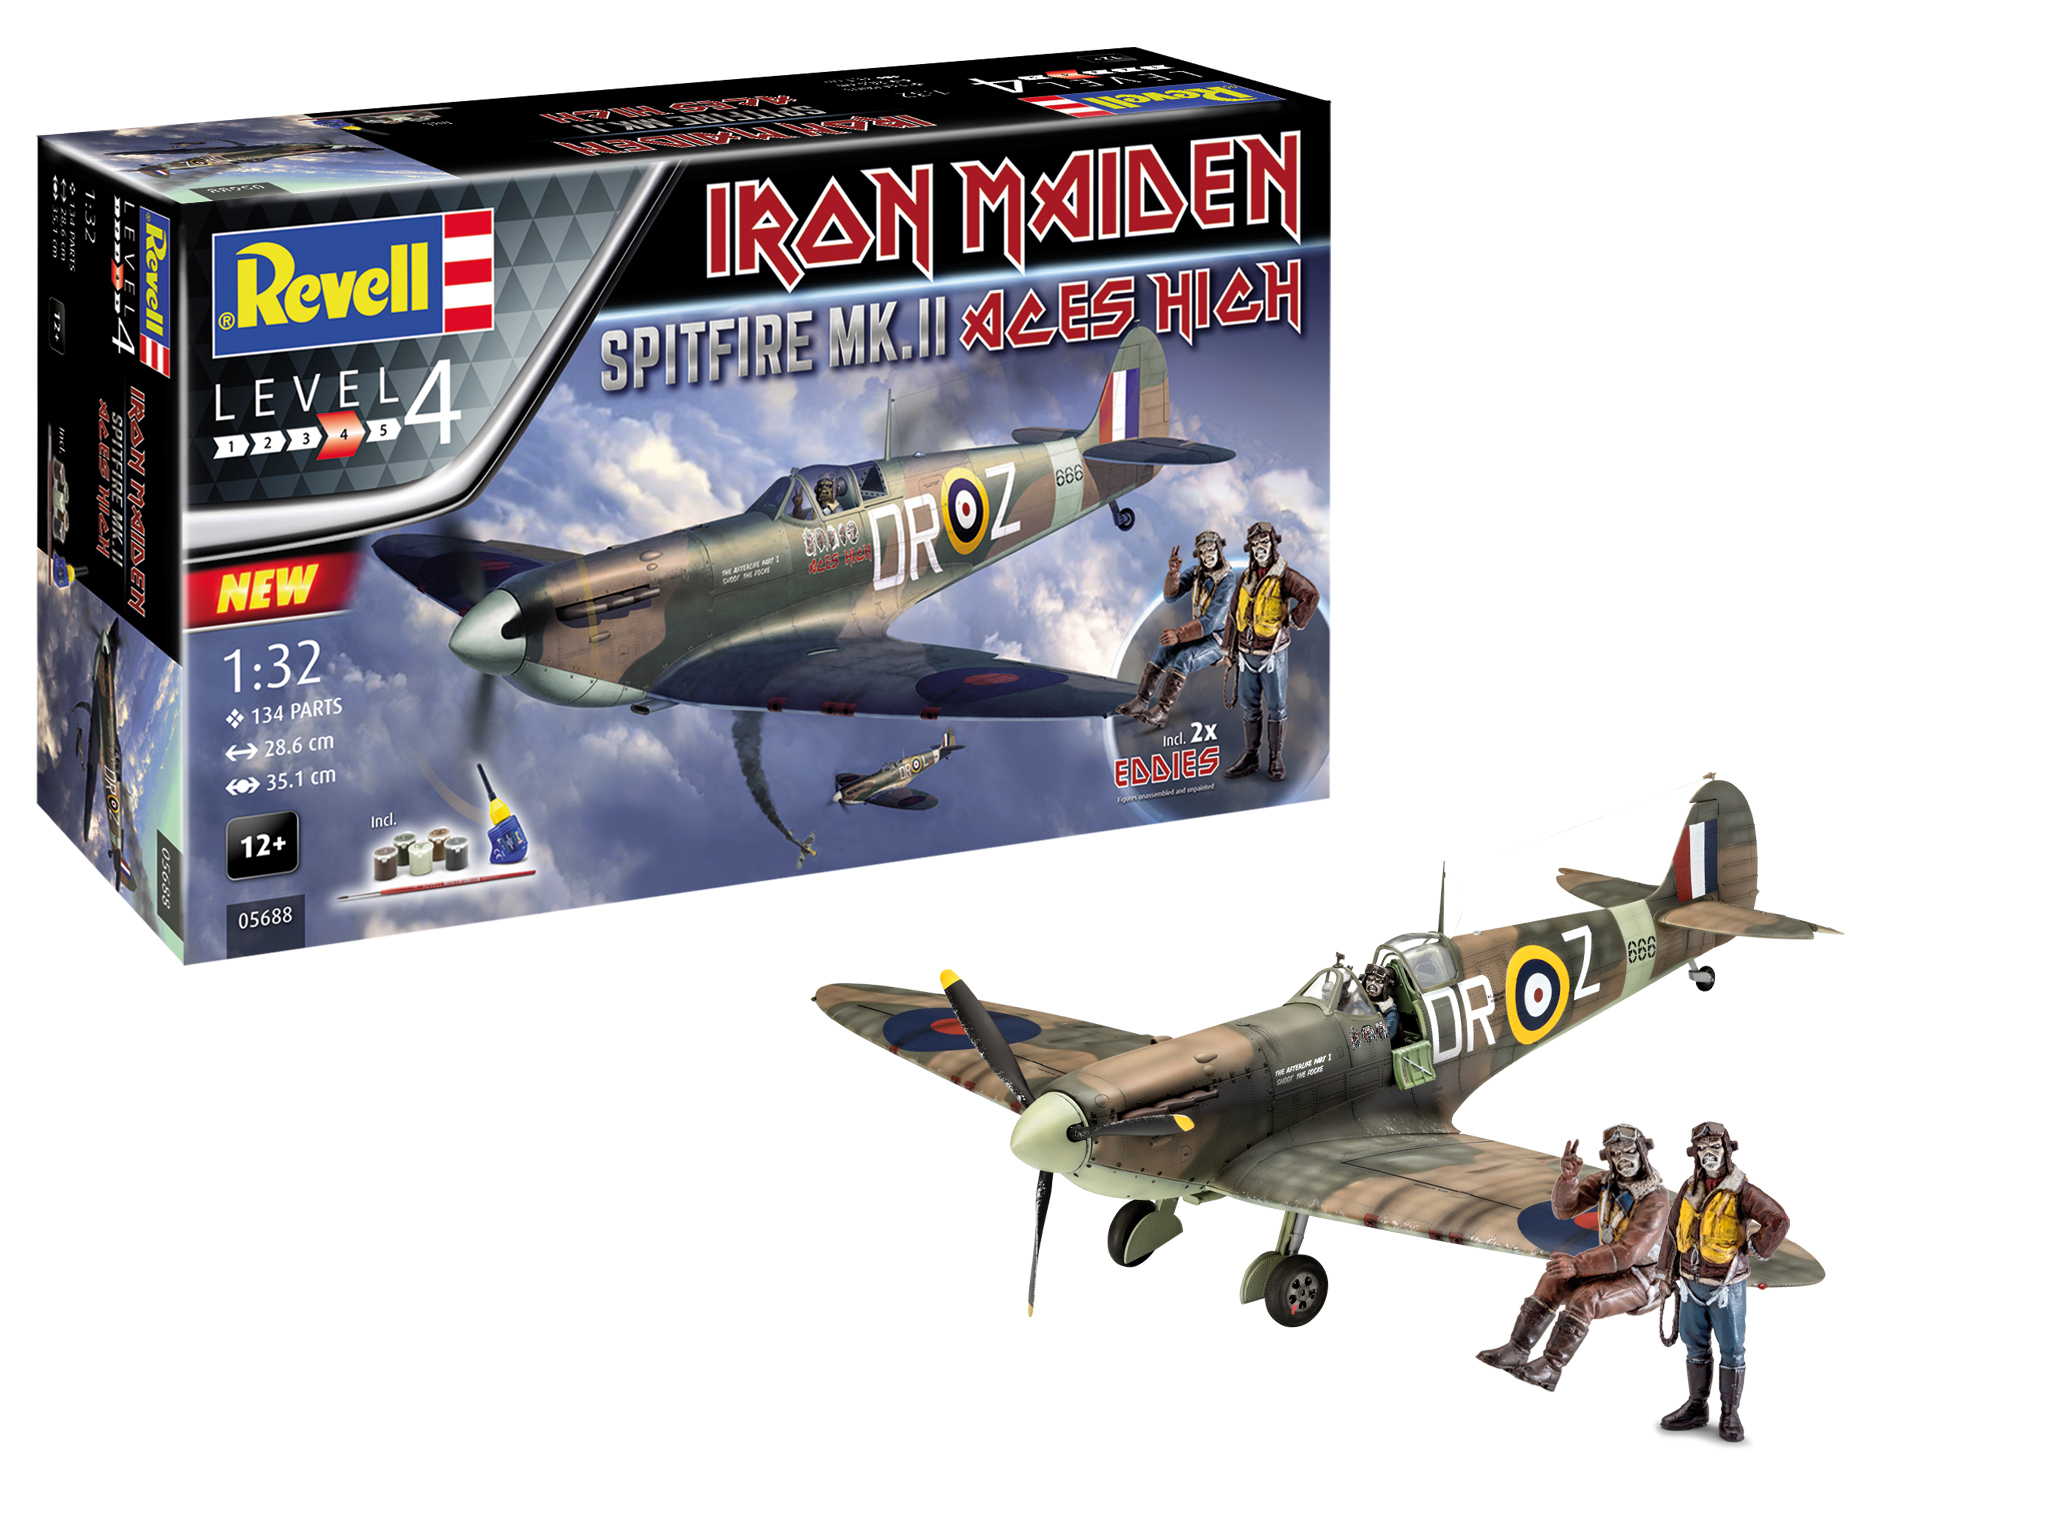 Revell 1/32 Iron Maiden "Aces High" Spitfire Mk.II Gift Set # 05688